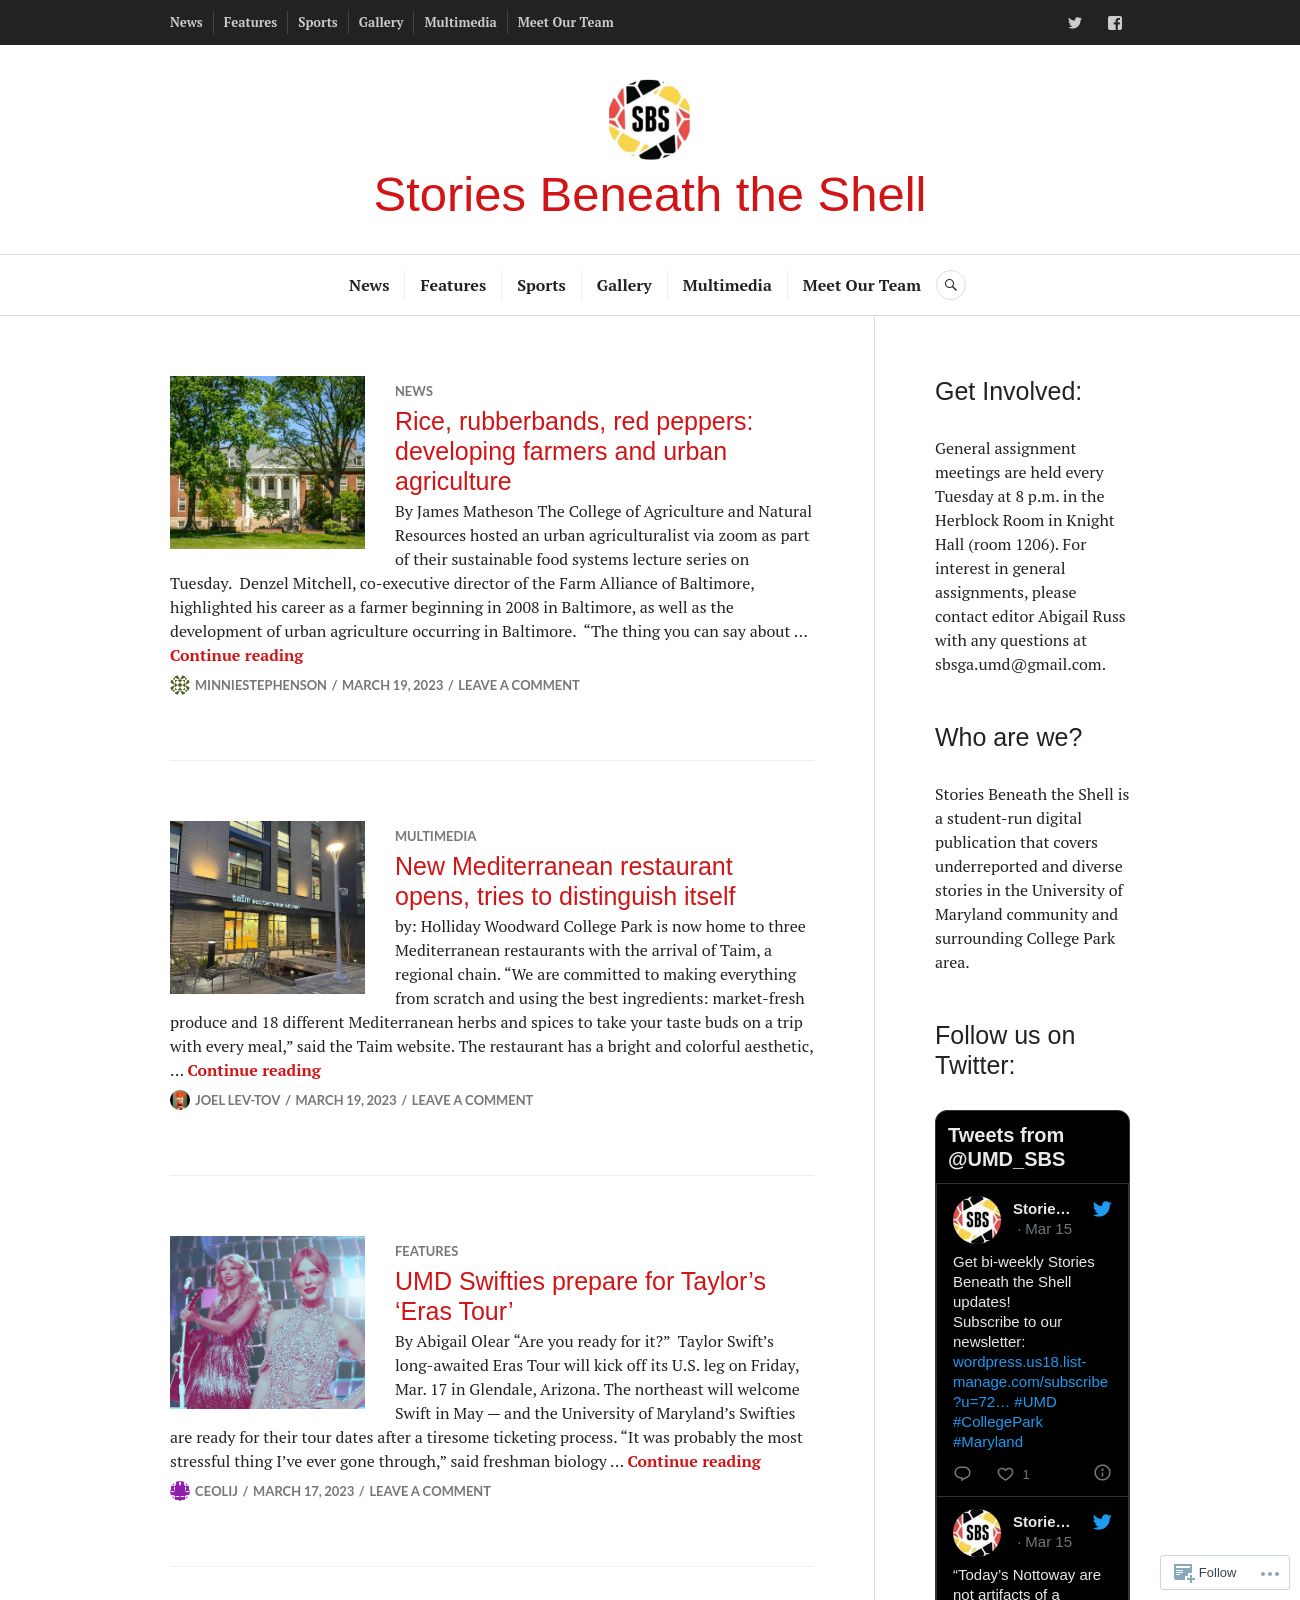 Stories Beneath the Shell at 2023-03-19 08:32:47-04:00 local time